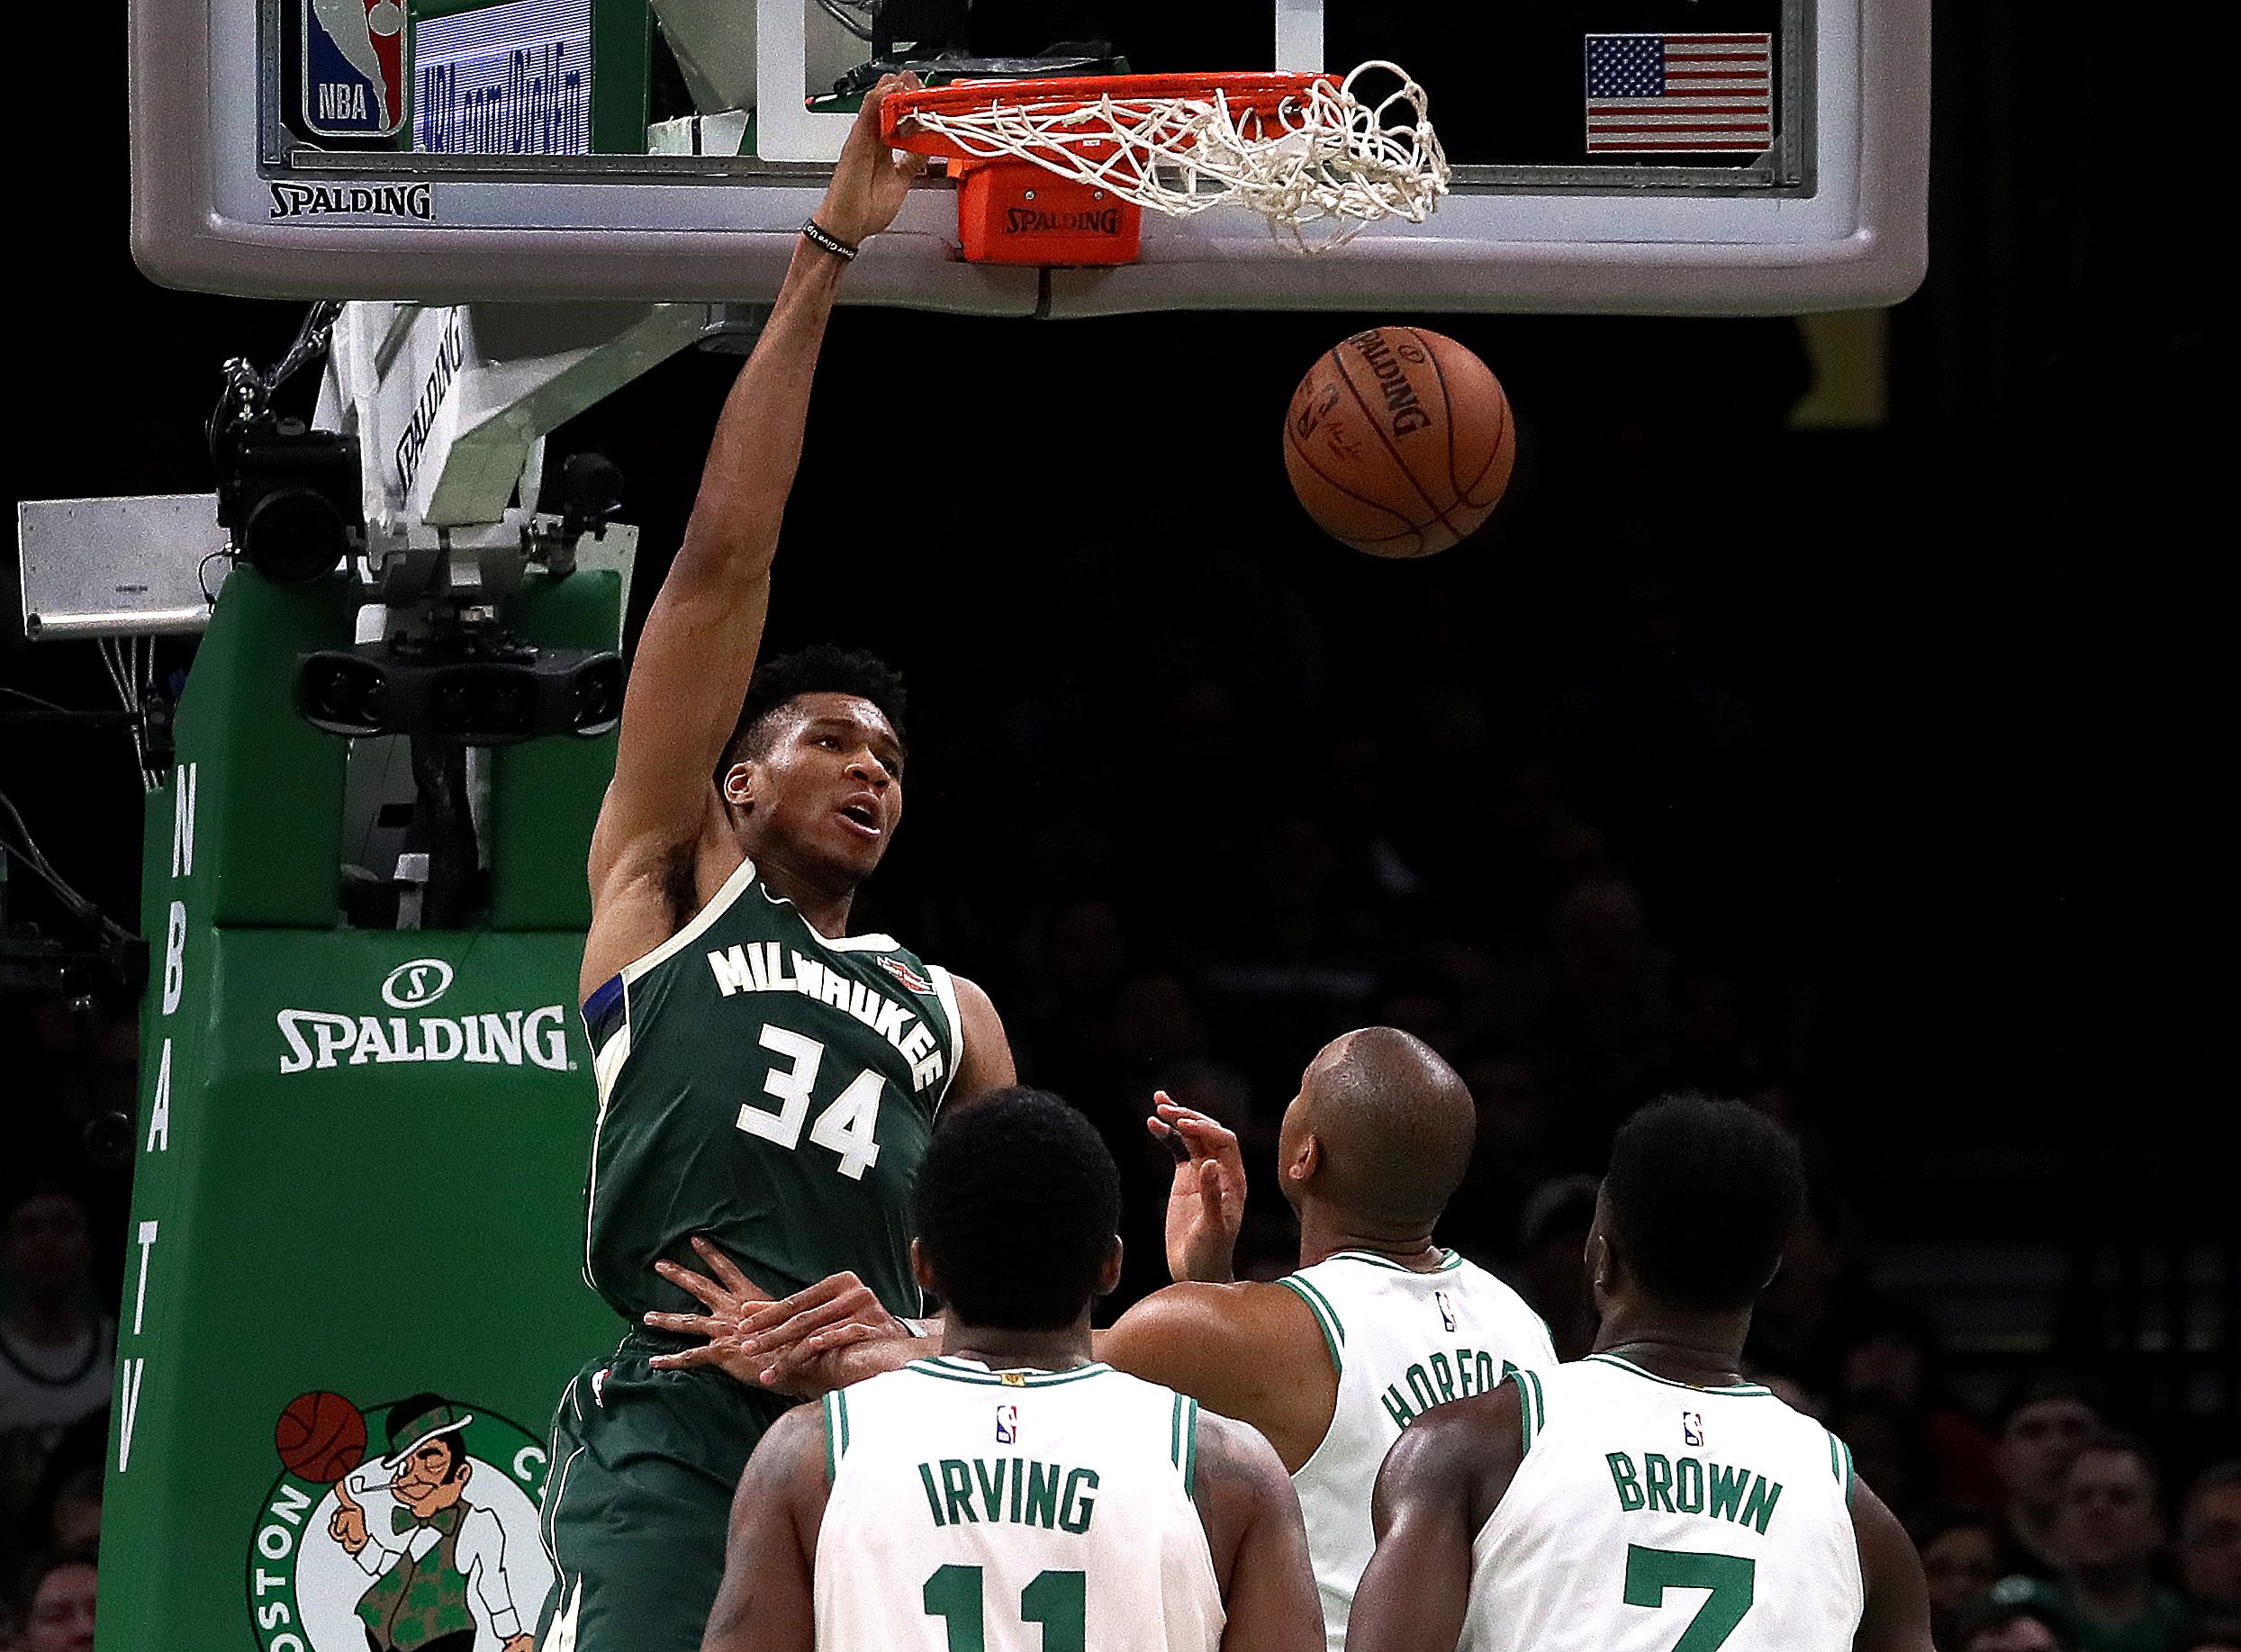 Inside the Al Horford-Giannis Antetokounmpo showdown: How the Celtics' big  man made a difference - The Boston Globe